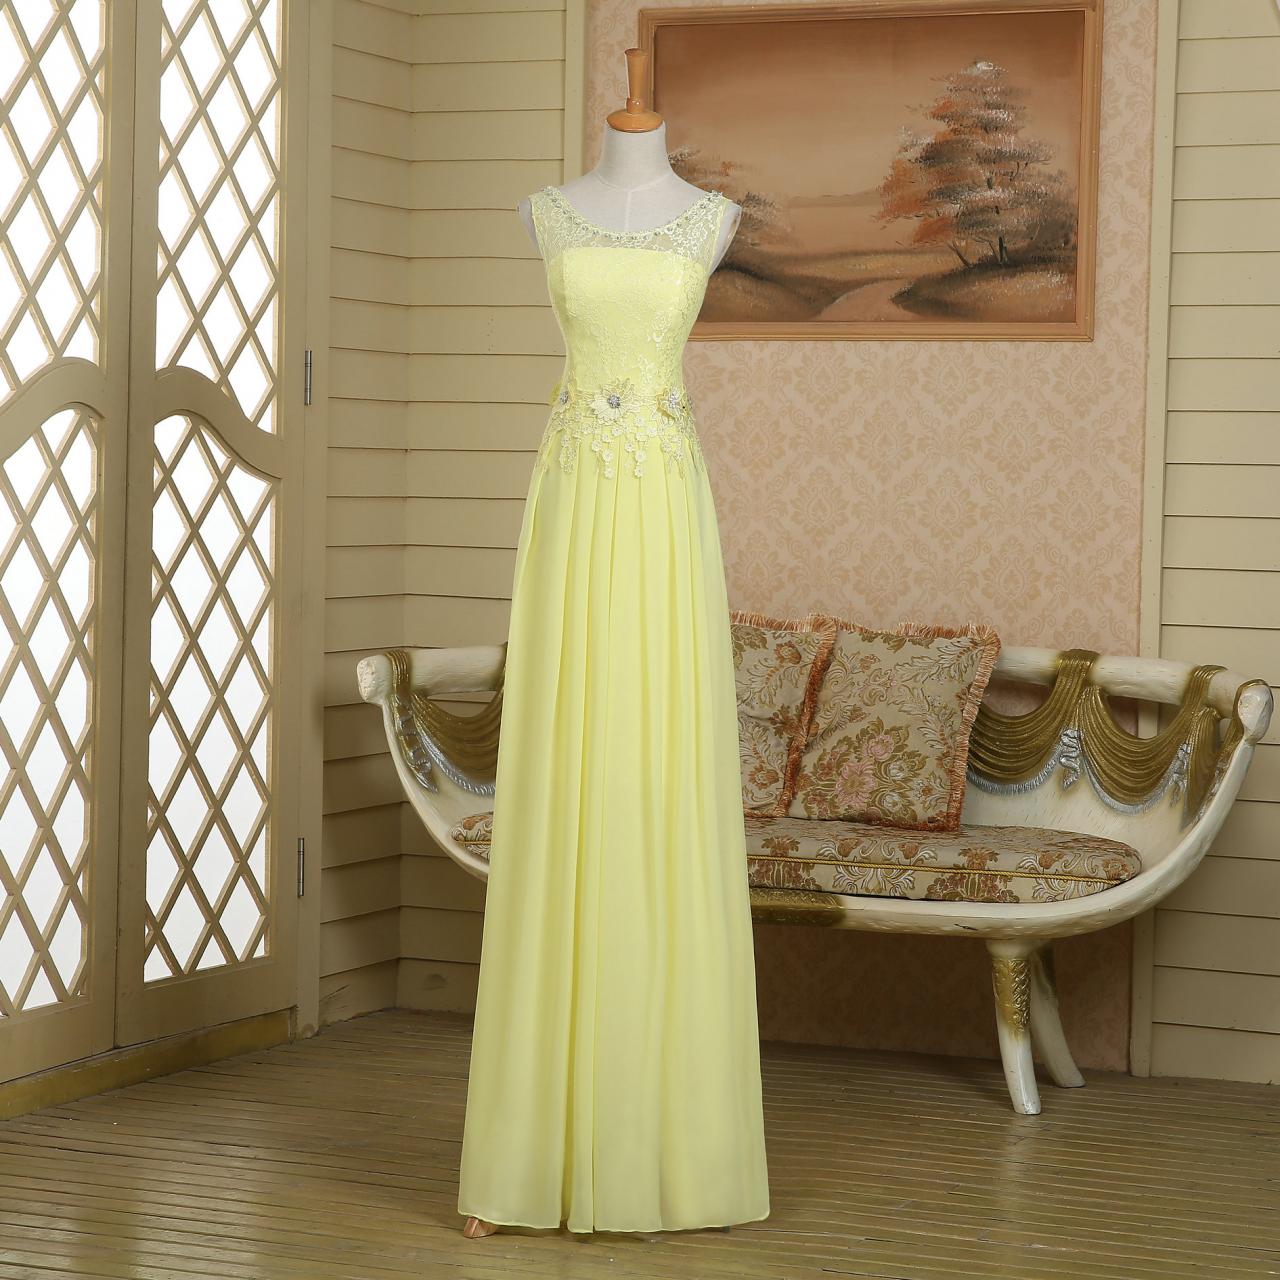 Empire Pageant Custom Modest See-through Top Yellow Chiffon Lace Long Prom Dress,evening Dress,homecoming Dress,party Dress,bridesmaid Dress